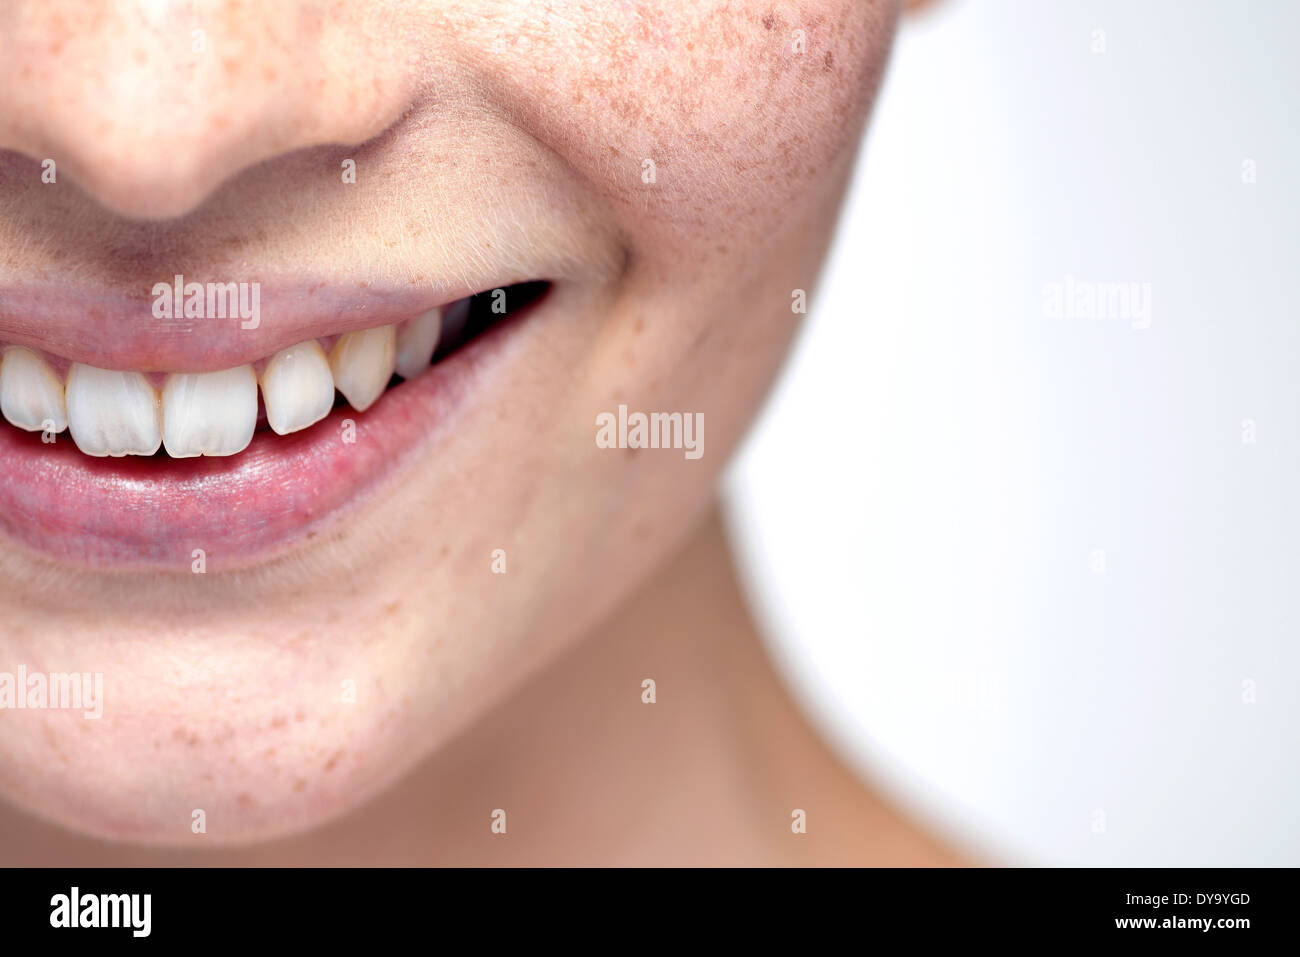 Young woman's lips, close-up Stock Photo